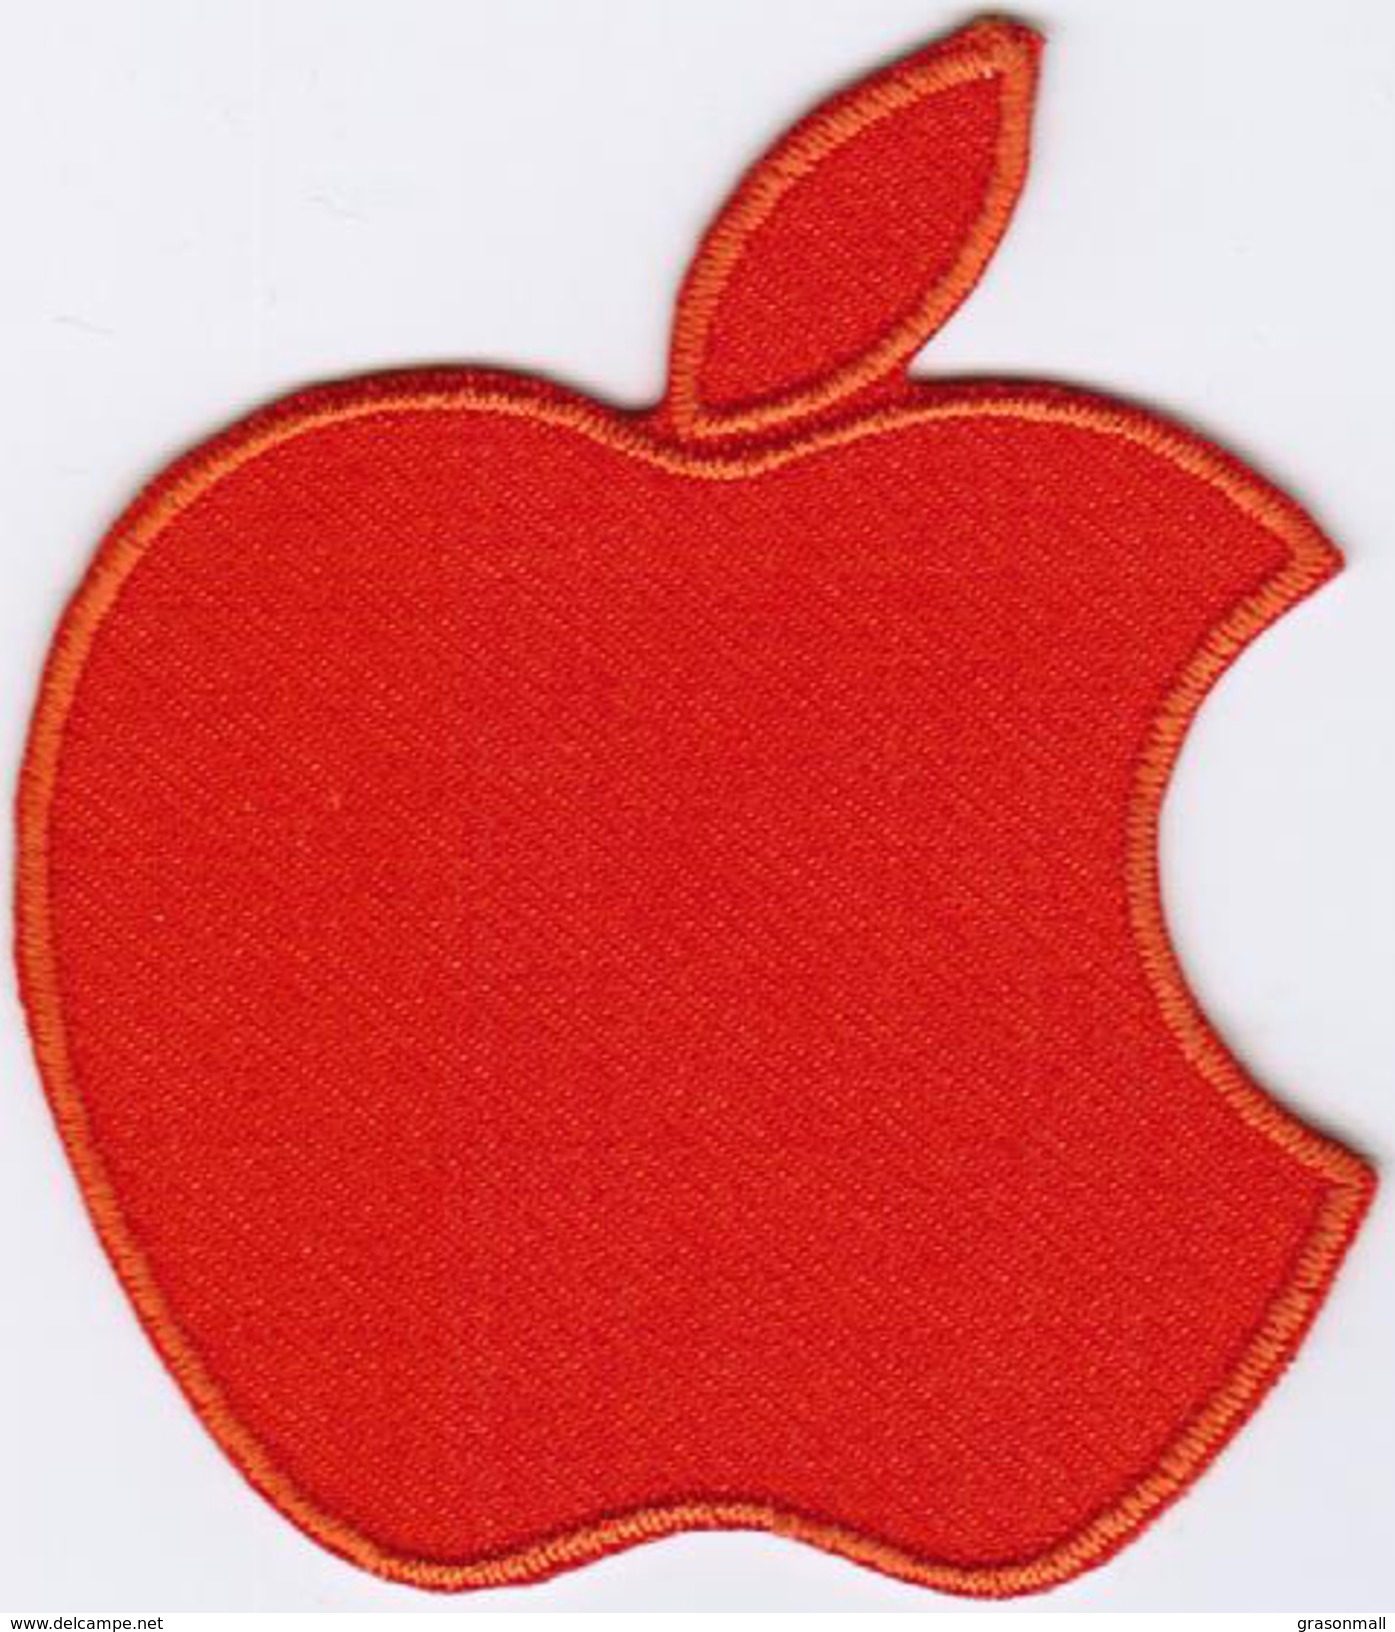 Apple Logo ORANGE Badge Iron On Embroidered Patch - Patches